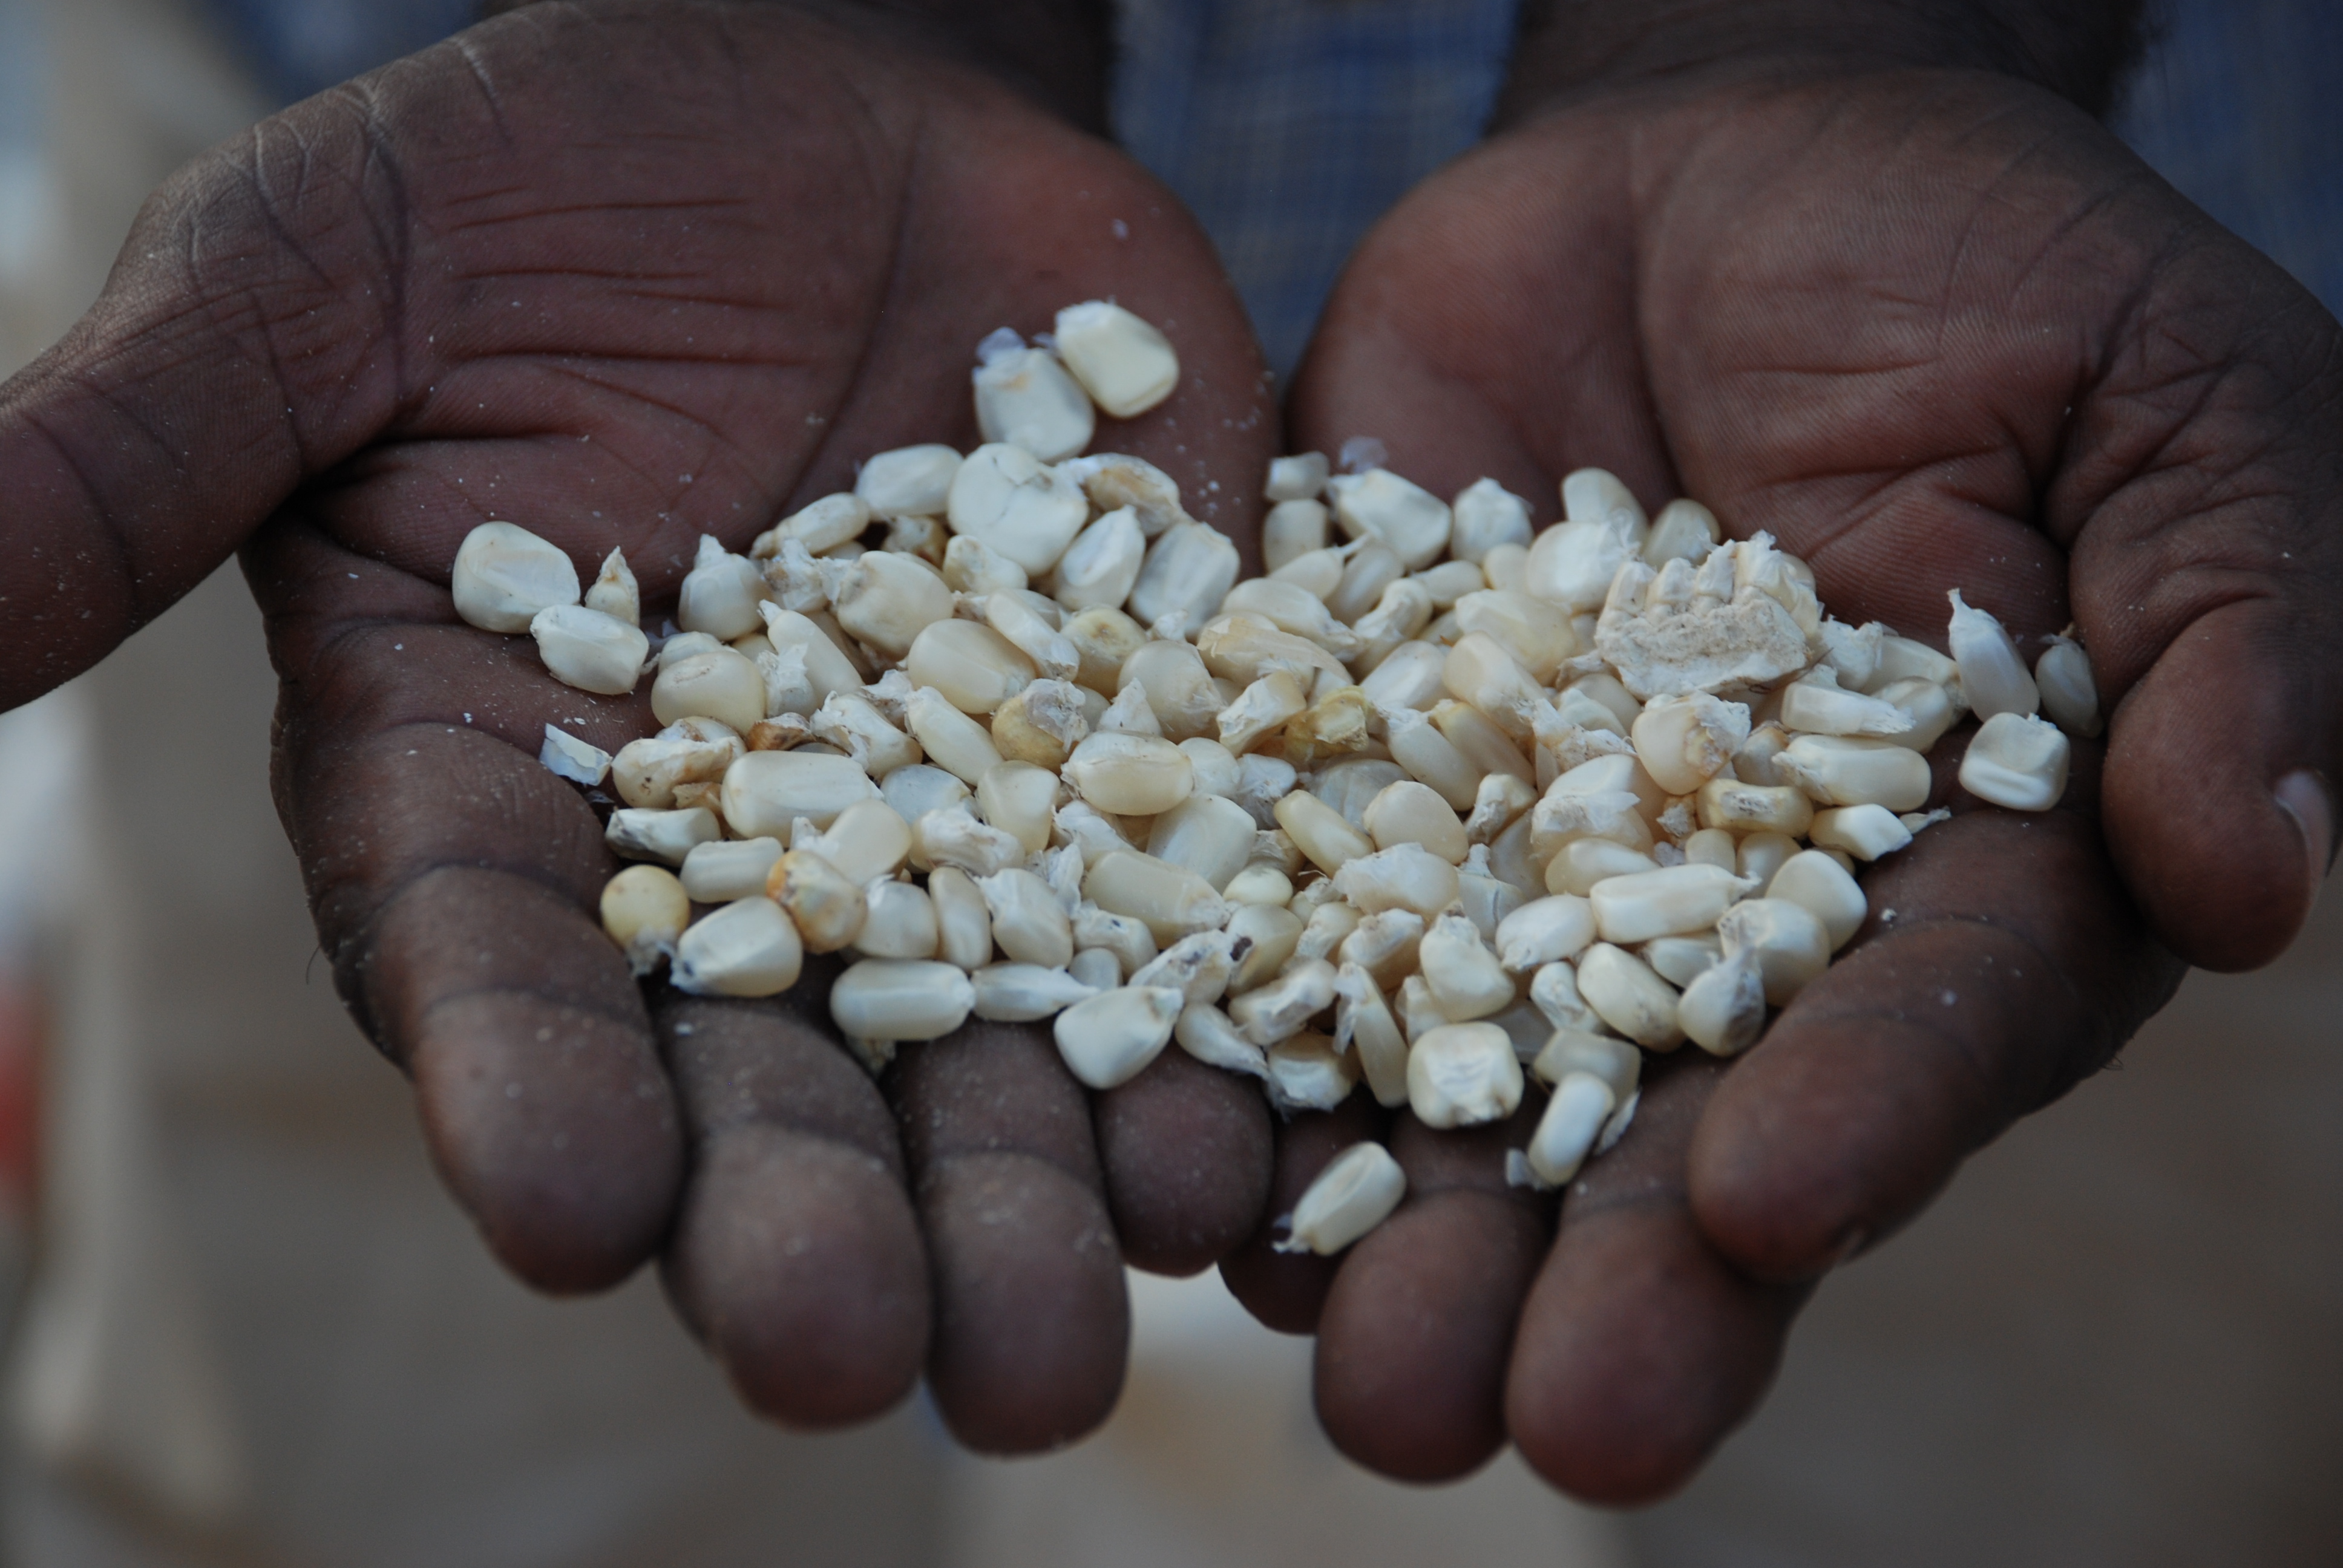 A handful of drought tolerant maize seed